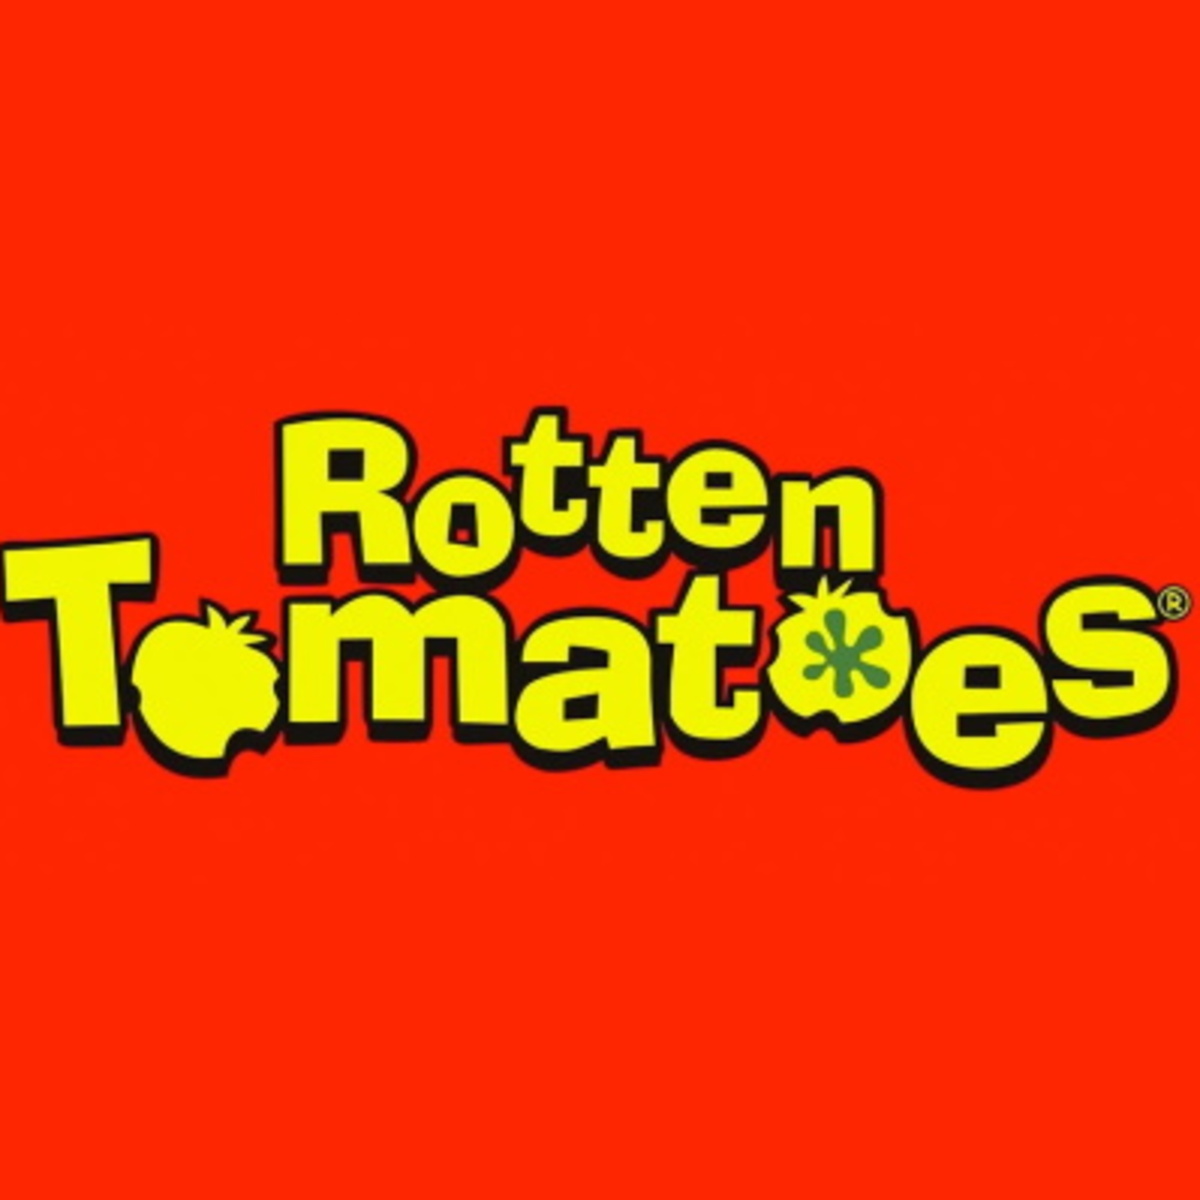 Report: Rotten Tomatoes Named Best Movie Rating Database - Media